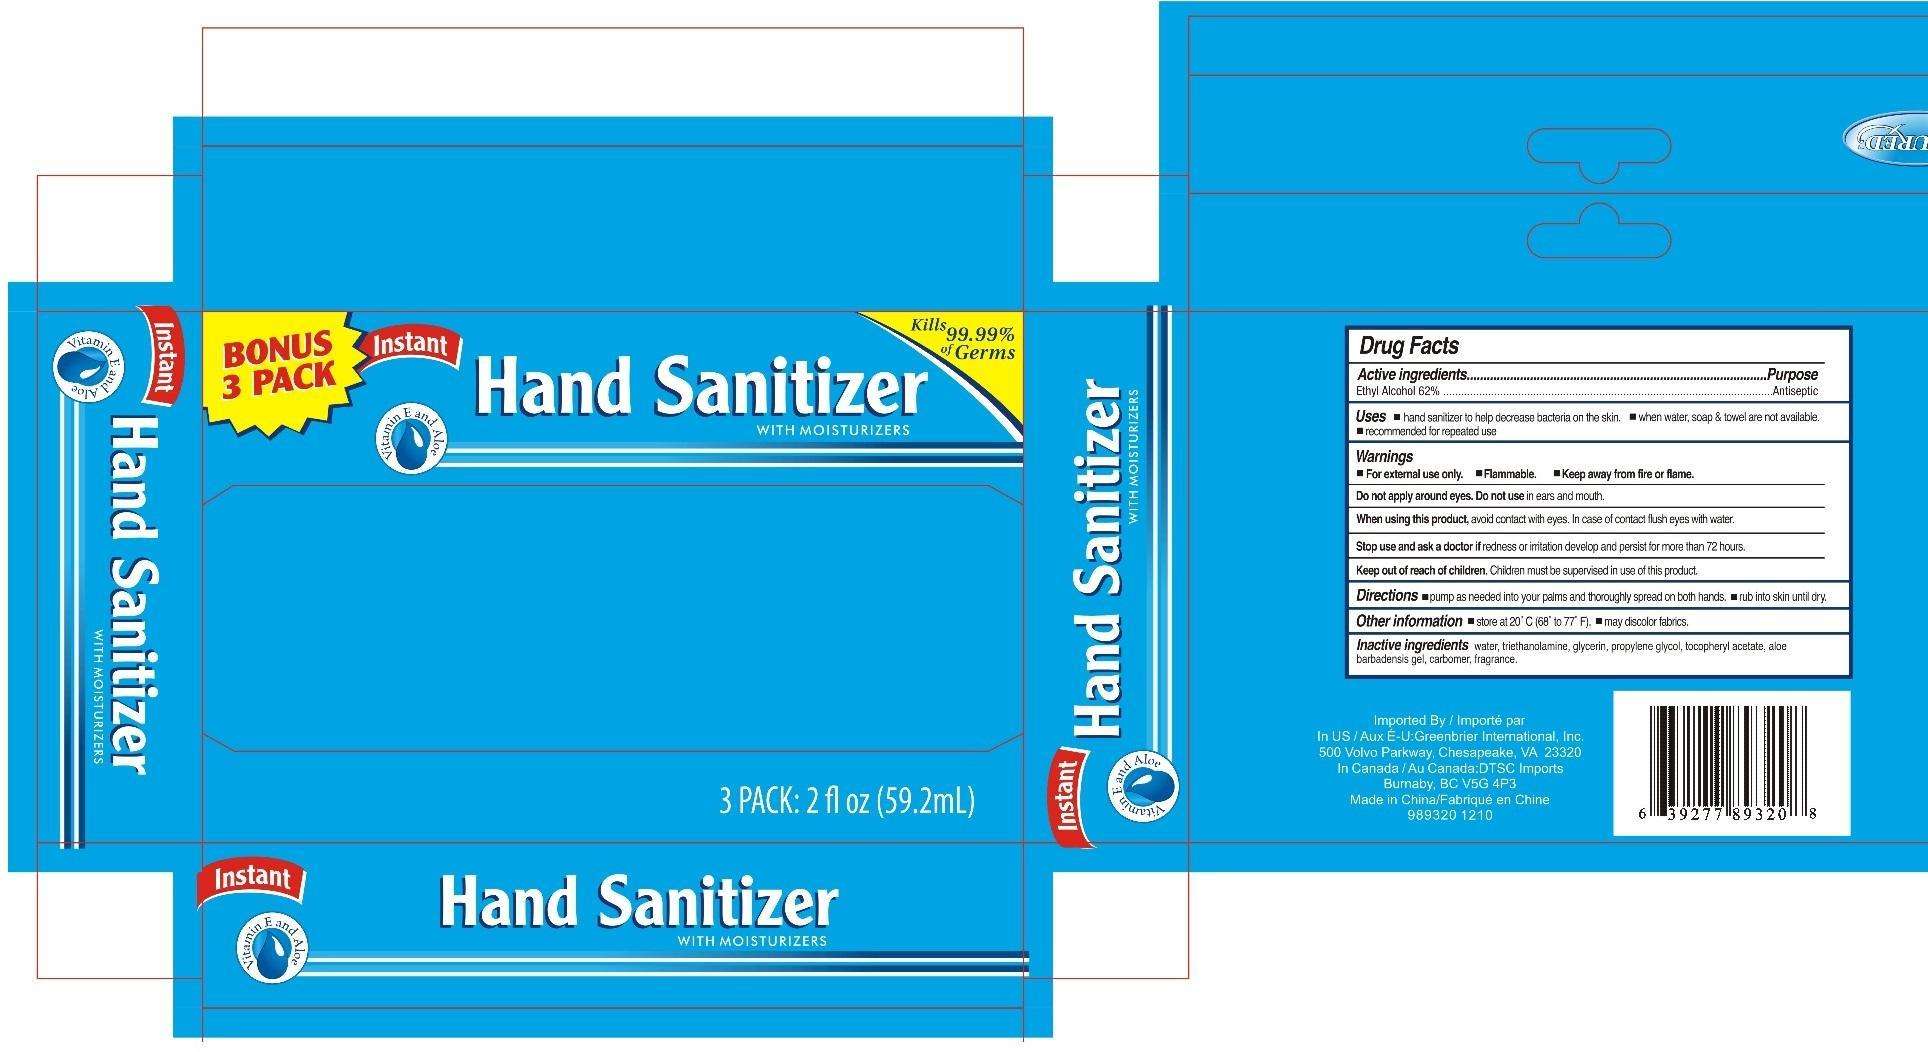 3 Pack Instant Hand Sanitizer with moisturizers